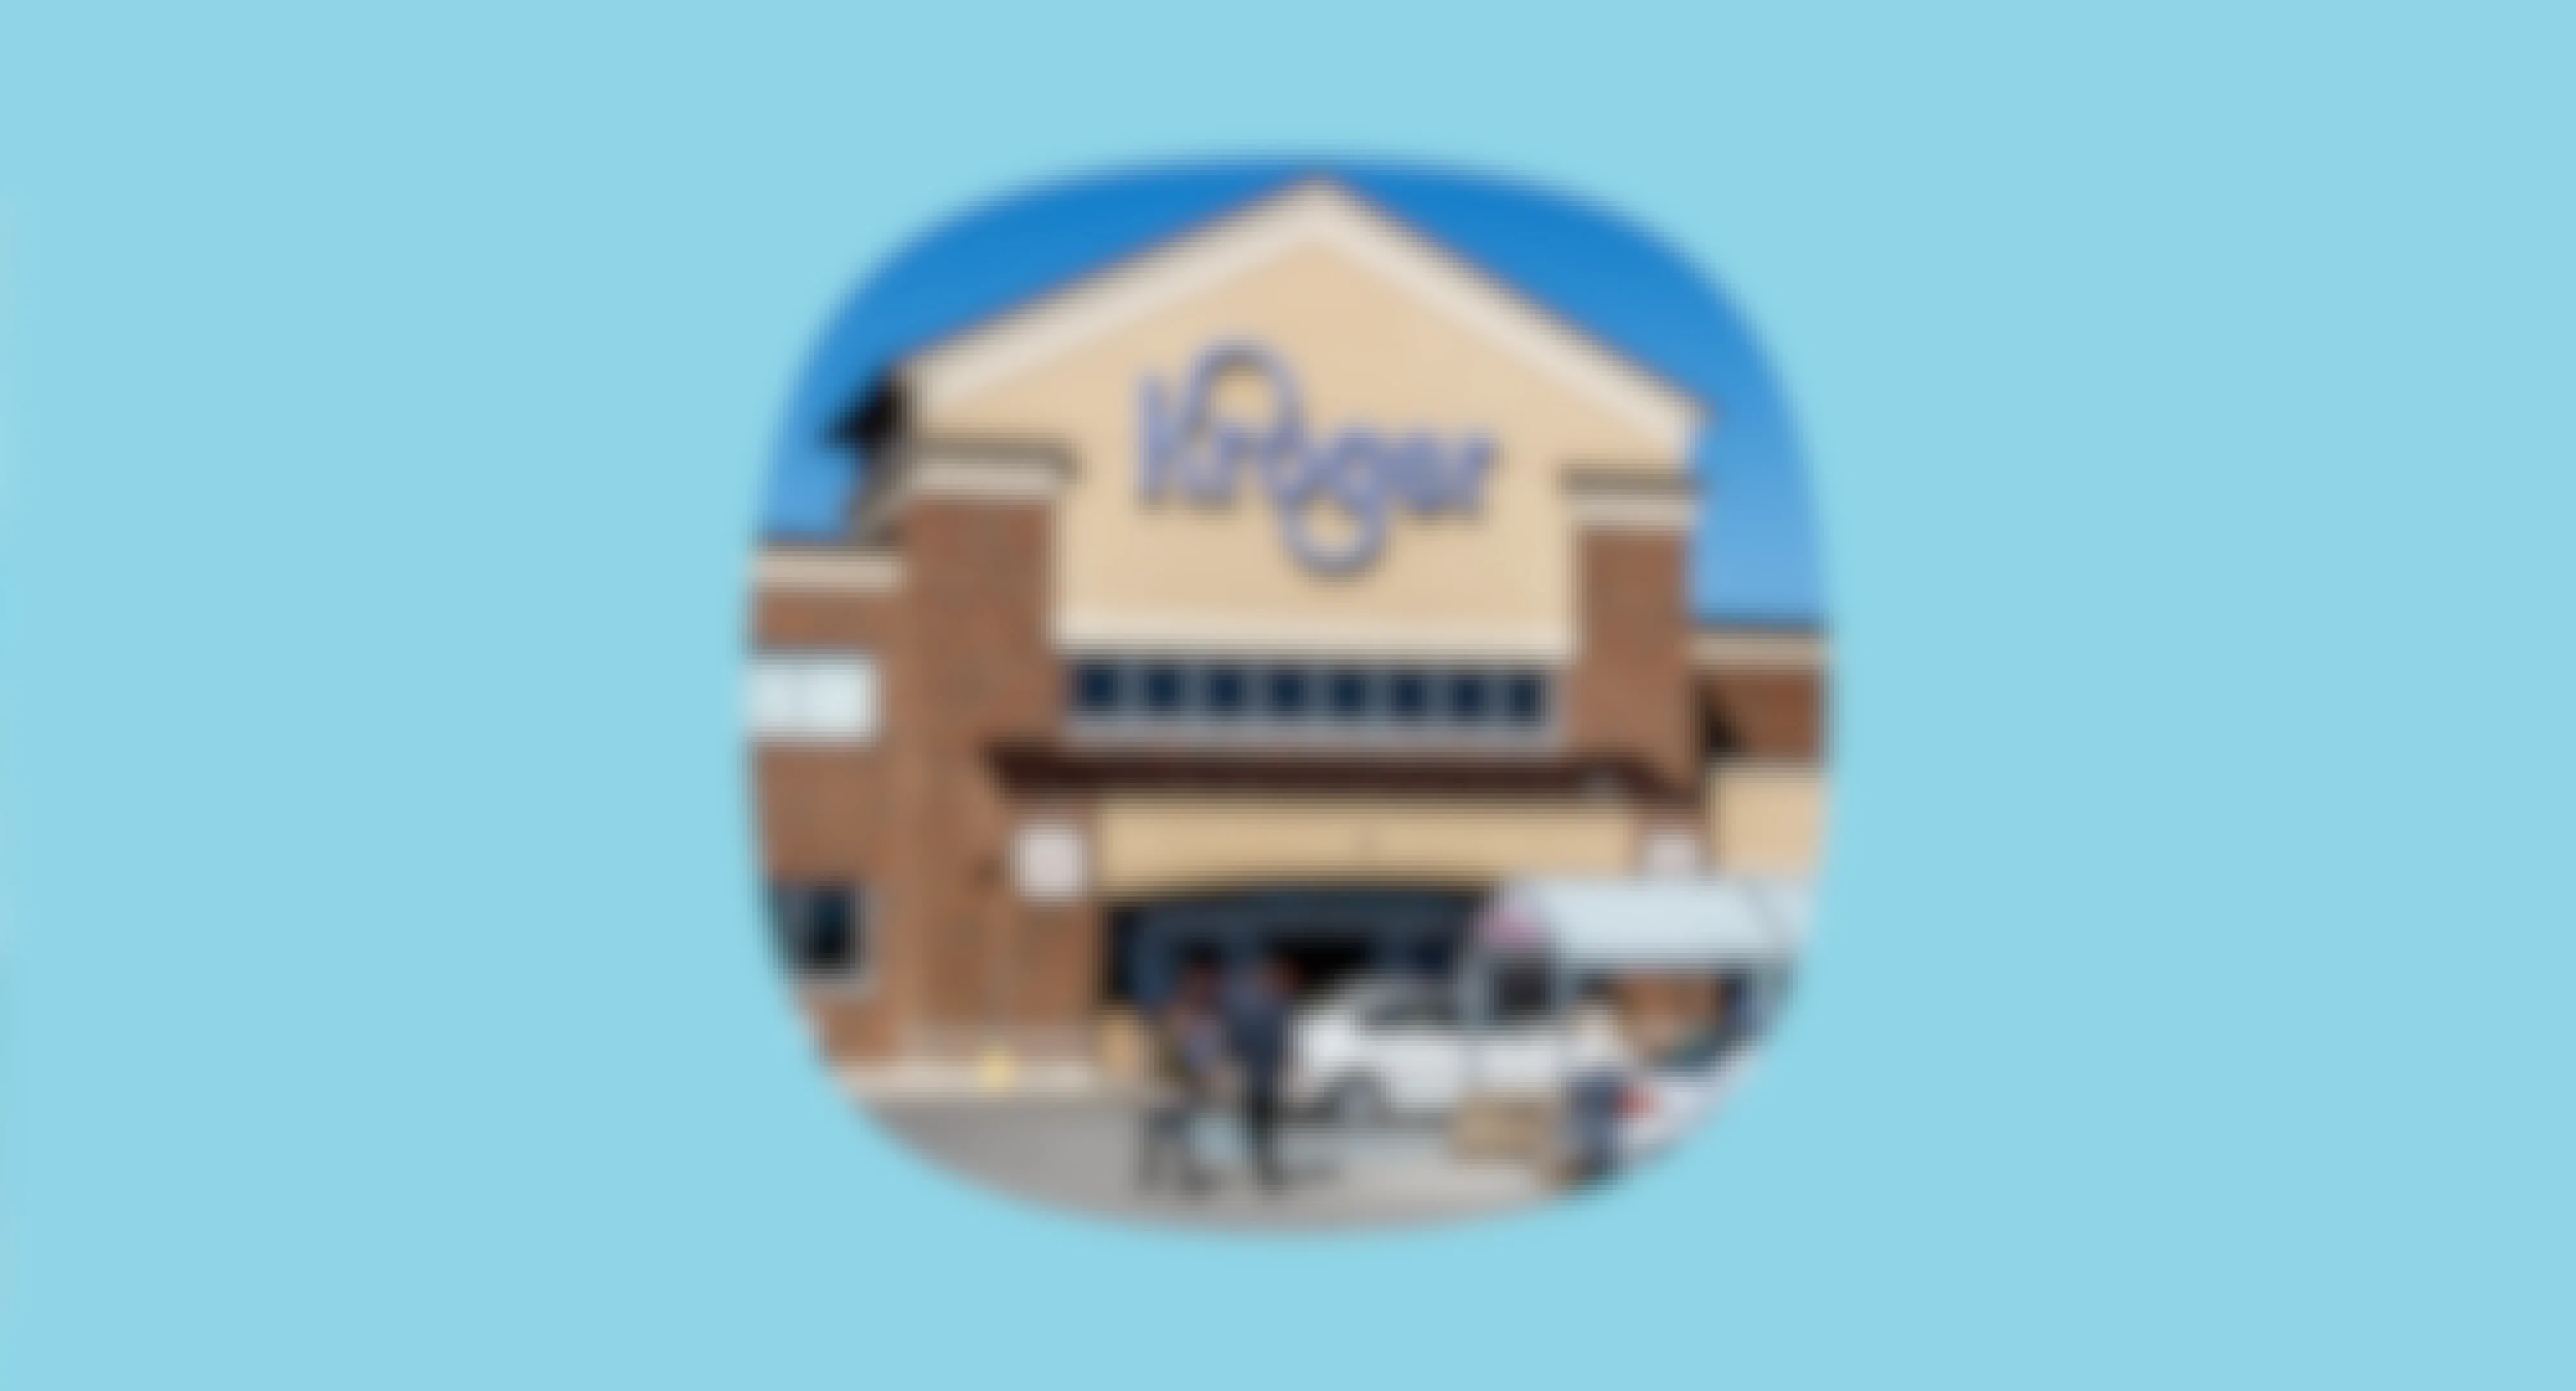 What Stores Does Kroger Own? It's More Than You Think